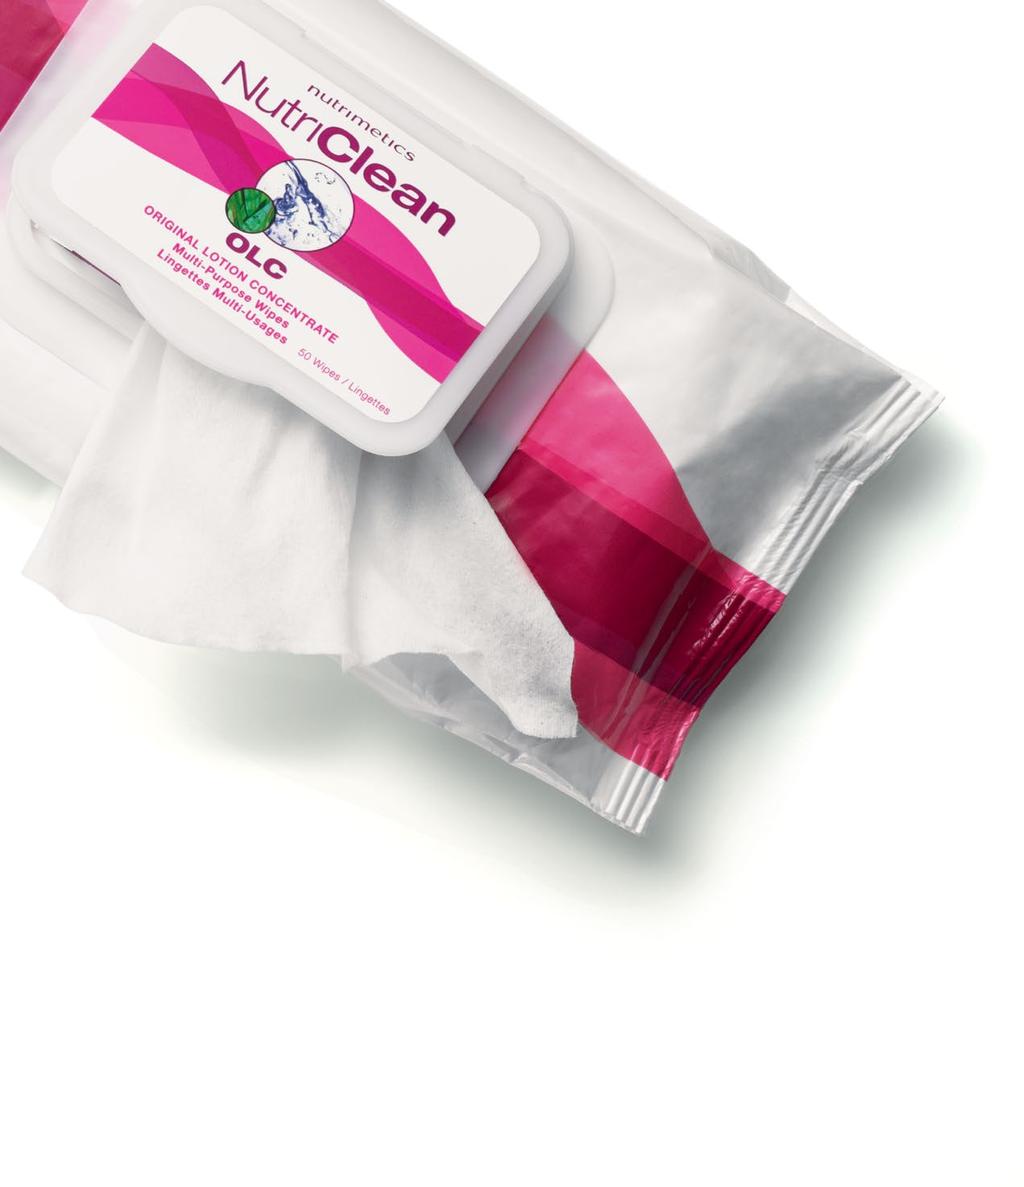 Wipe away worries Pre-moistened, multi-purpose Conveniently premoistened with our proven OLC formula, NutriClean Multi- Purpose wipes gently and effectively clean a variety of surfaces from hands to